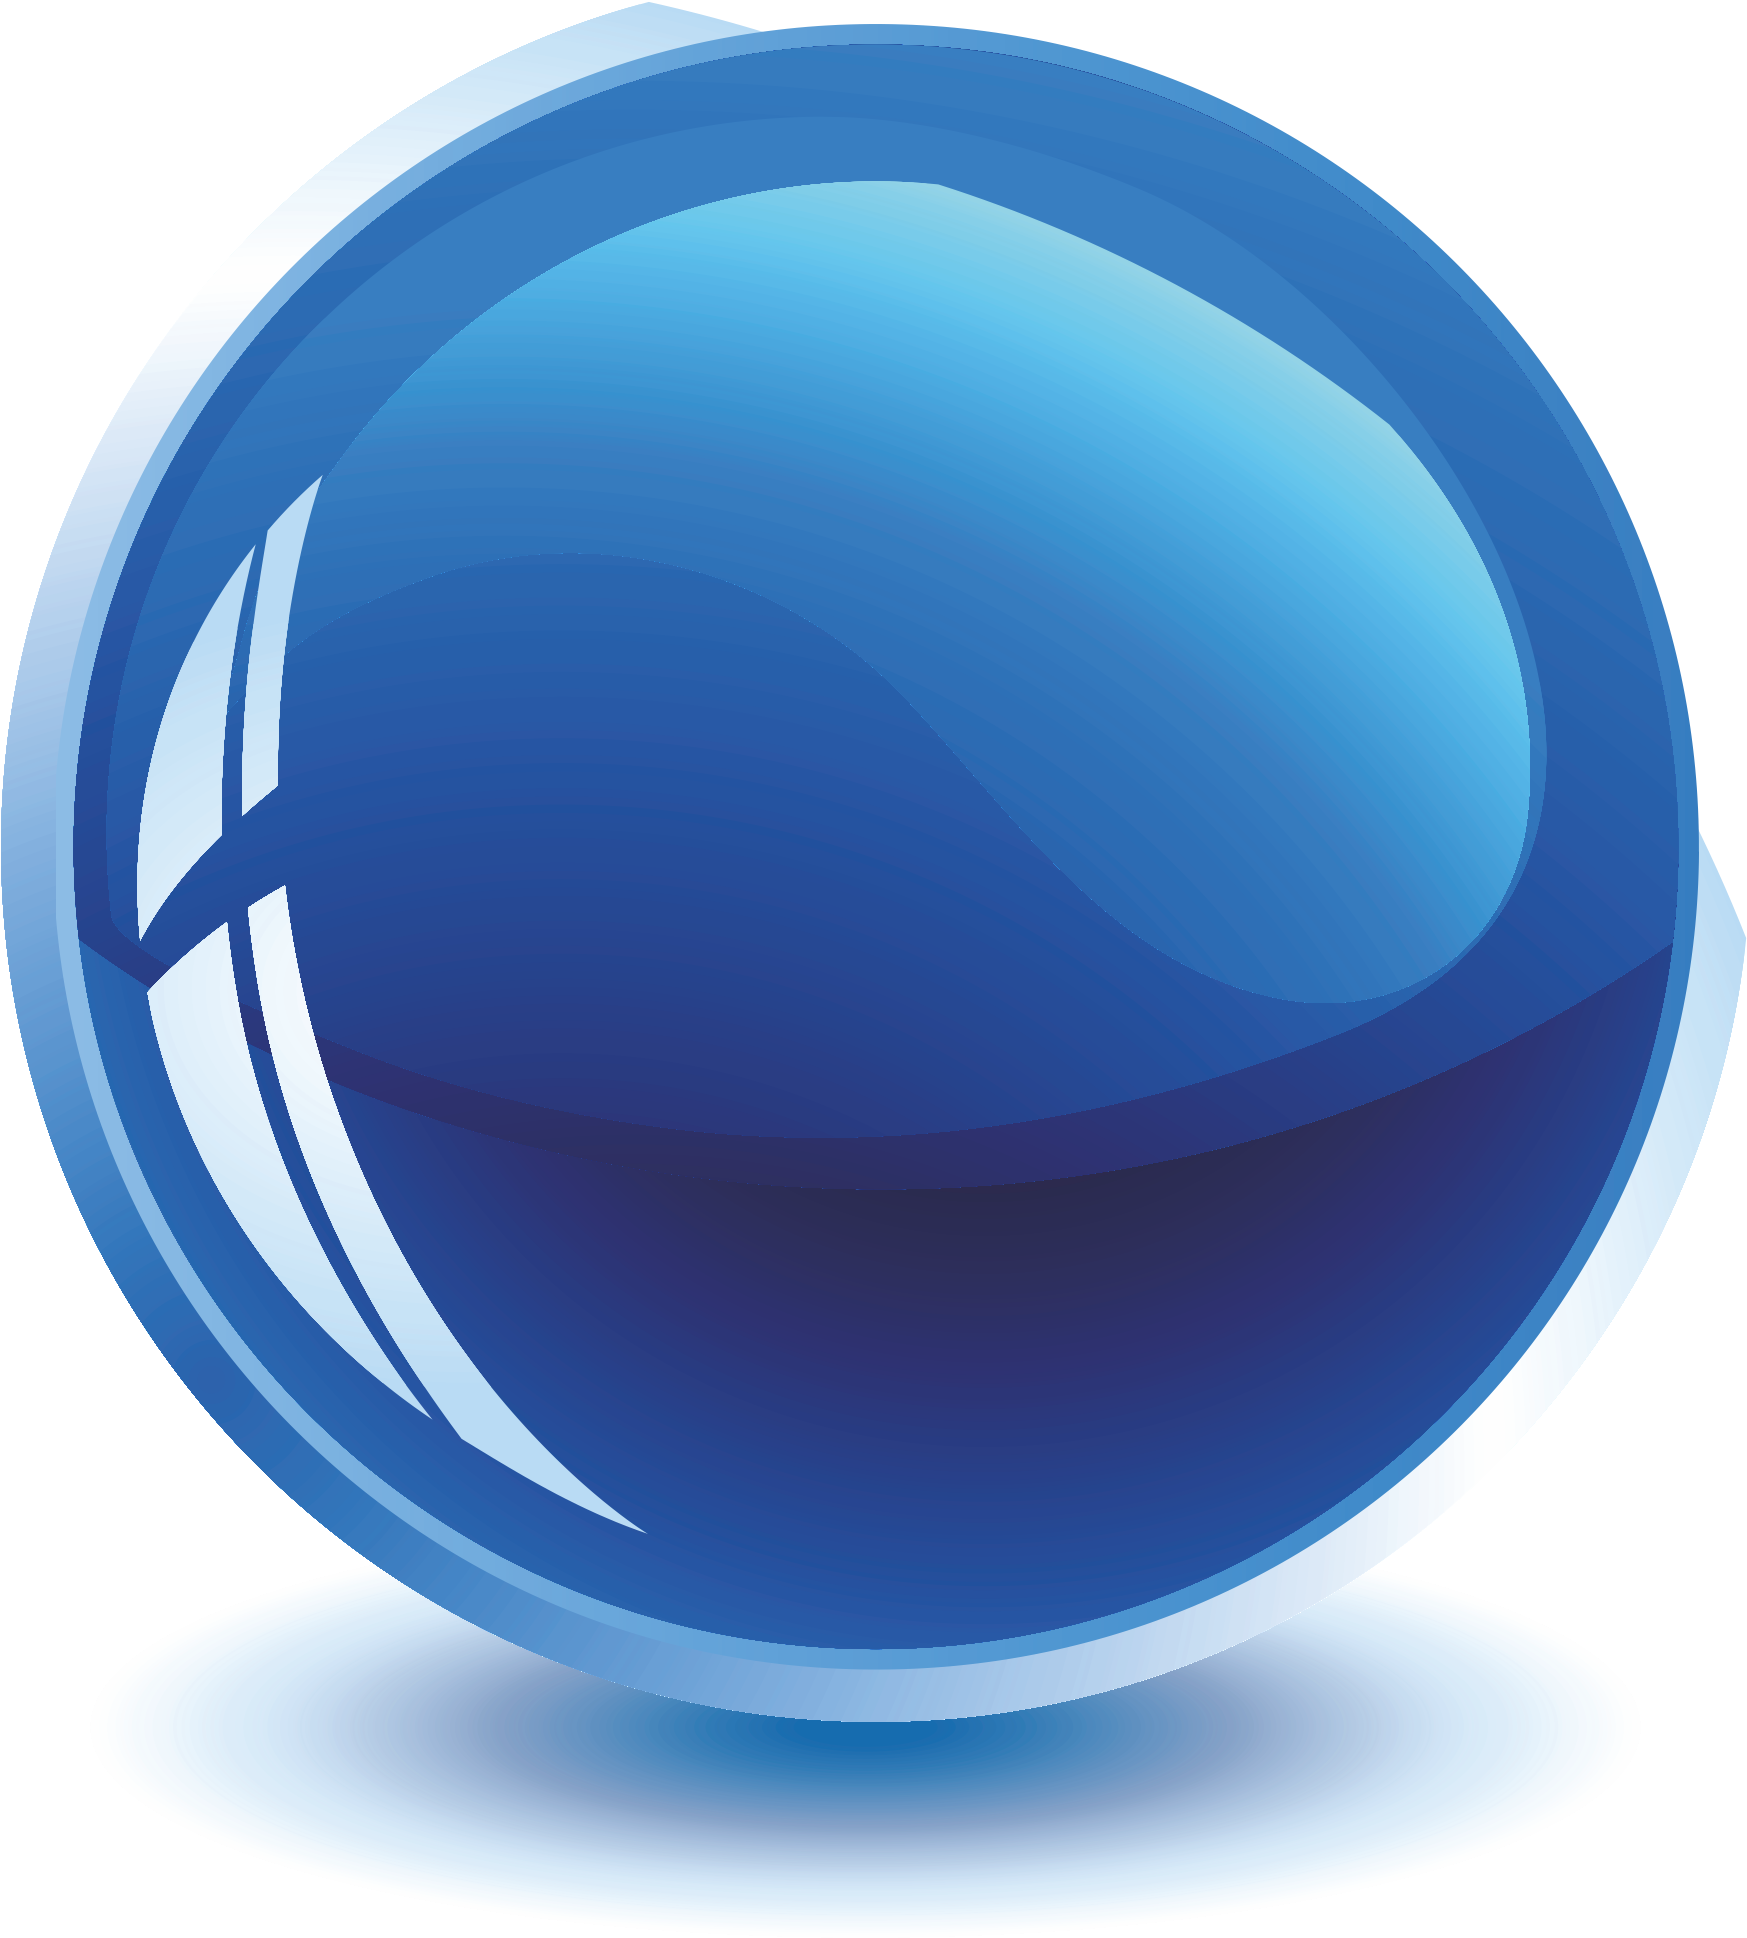 Ball Sphere Geometry Three - Blue Ball Transparent Background Clipart ...